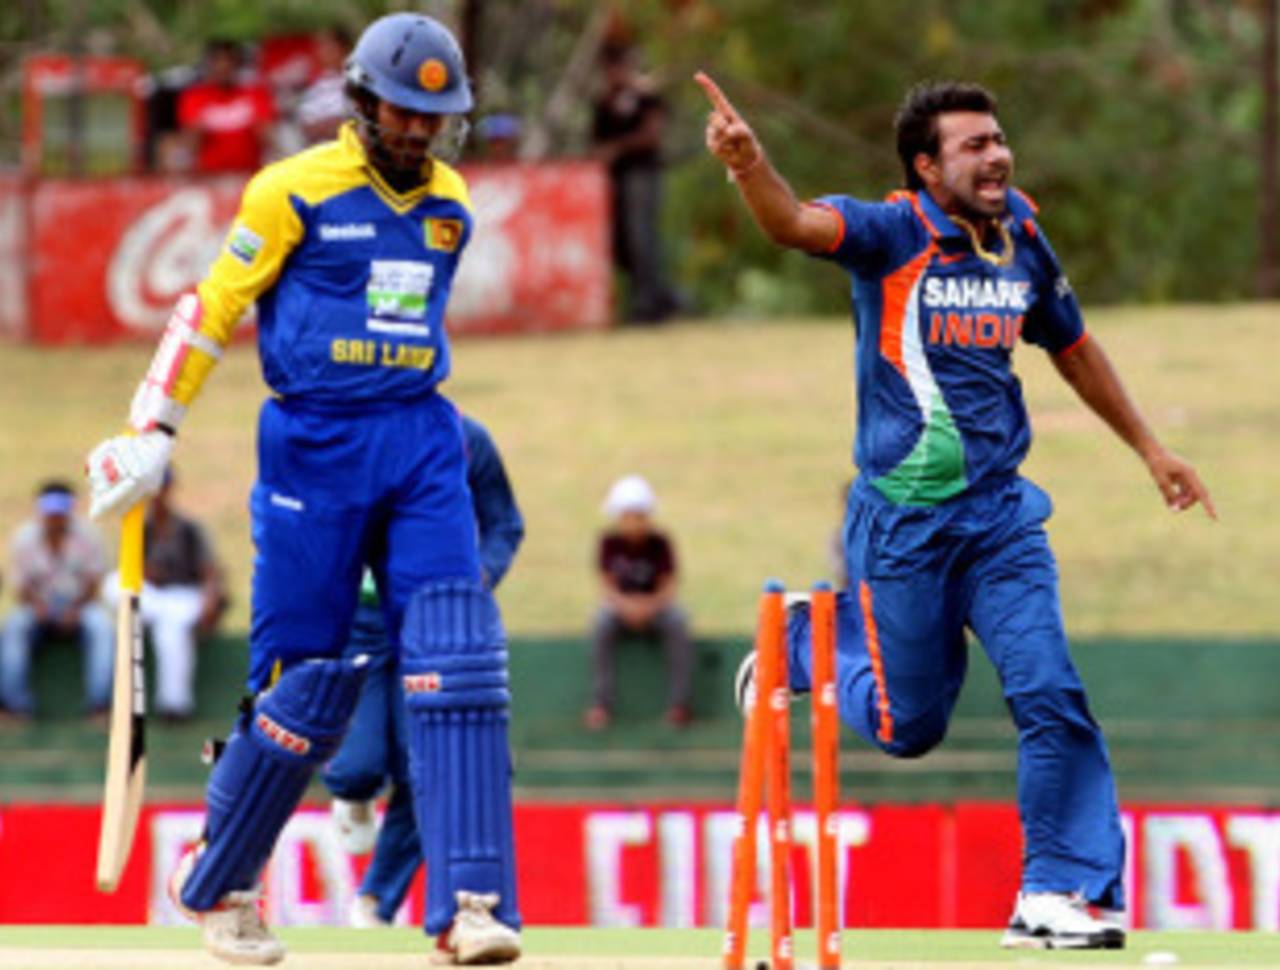 India struck early and often as the Sri Lanka top-order failed to apply itself&nbsp;&nbsp;&bull;&nbsp;&nbsp;Cameraworx/Live Images